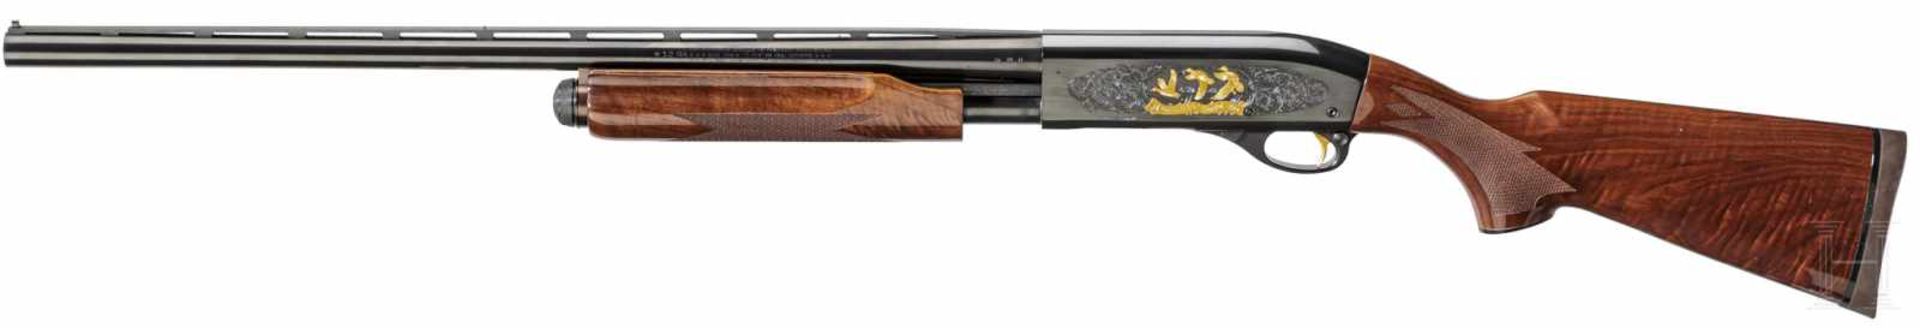 Remington Mod. 870, No 2 of a 3-piece collector's set w/matching numbers, 180th year anniversary - Bild 2 aus 2